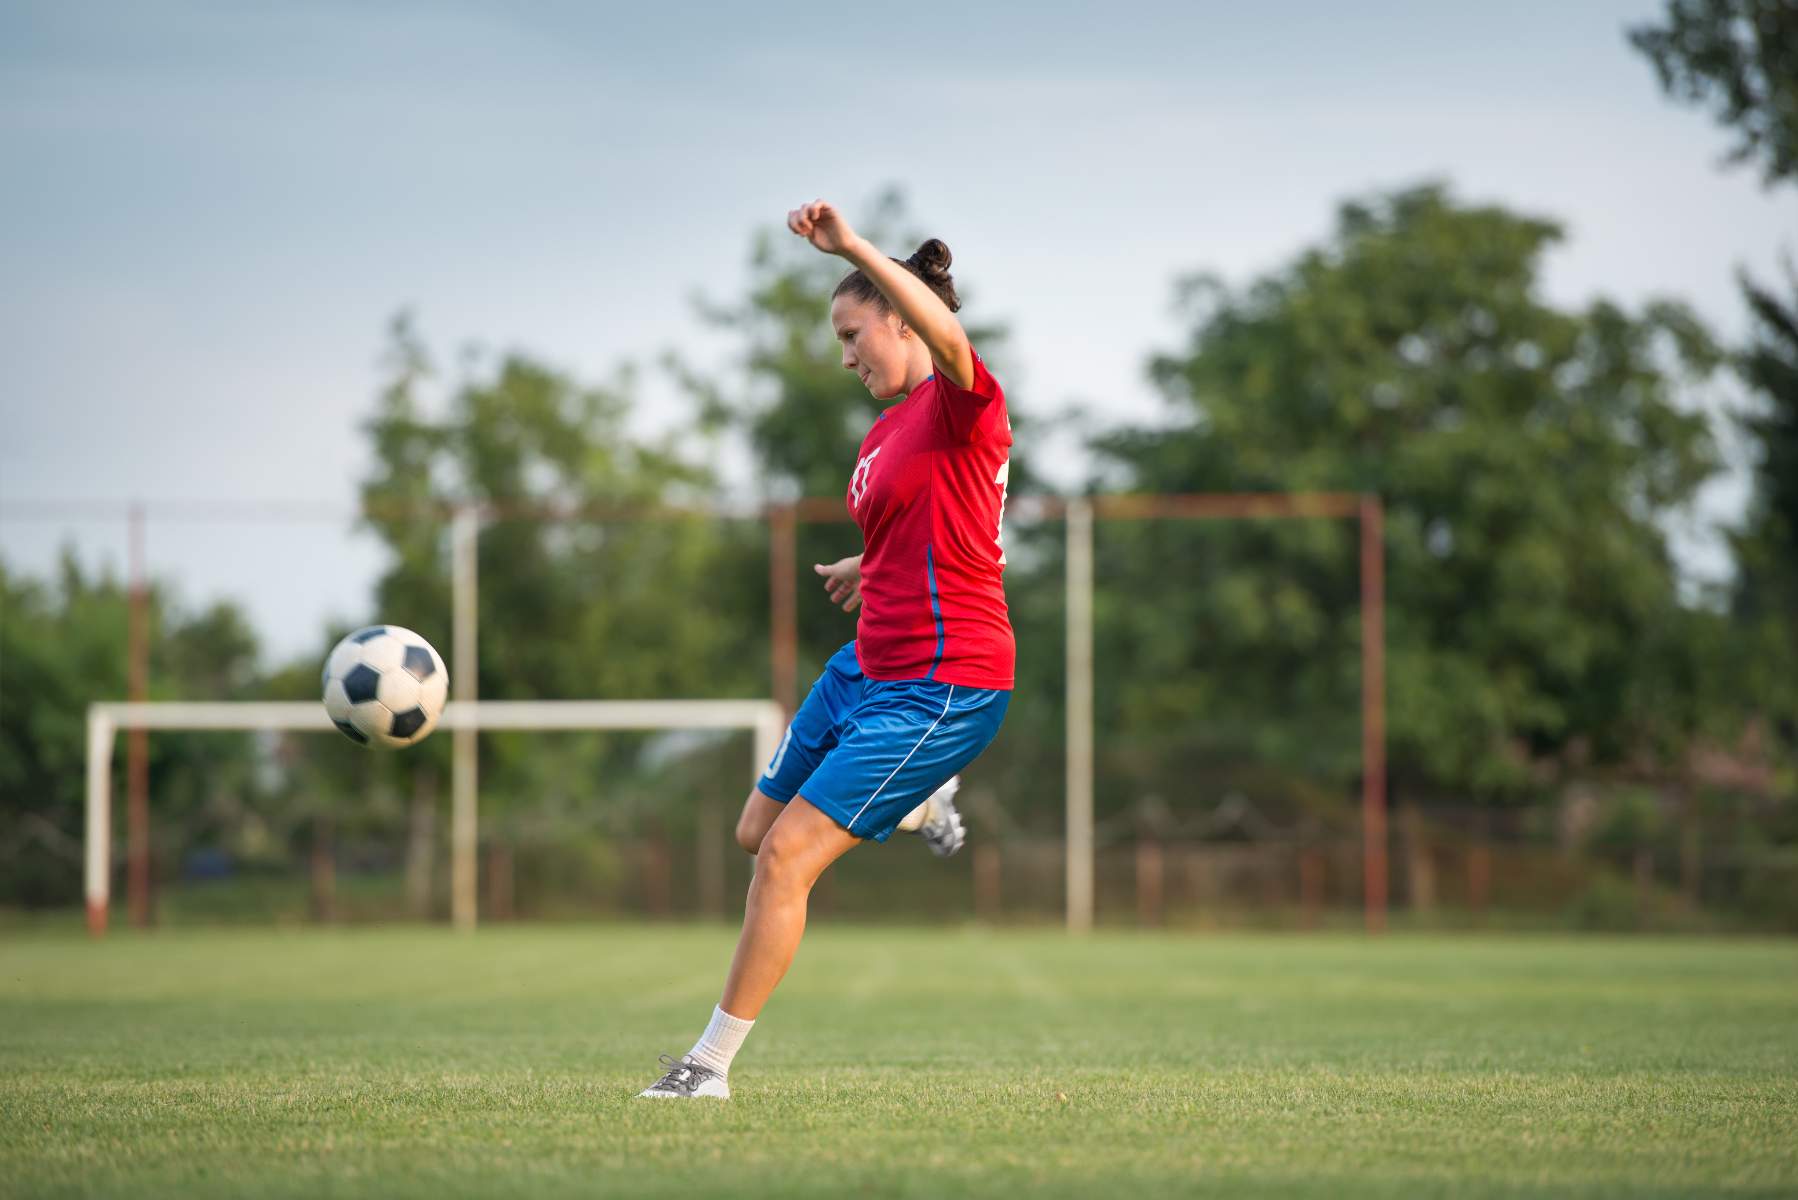 Is There an Epidemic in ACL Injuries in Women’s Soccer?